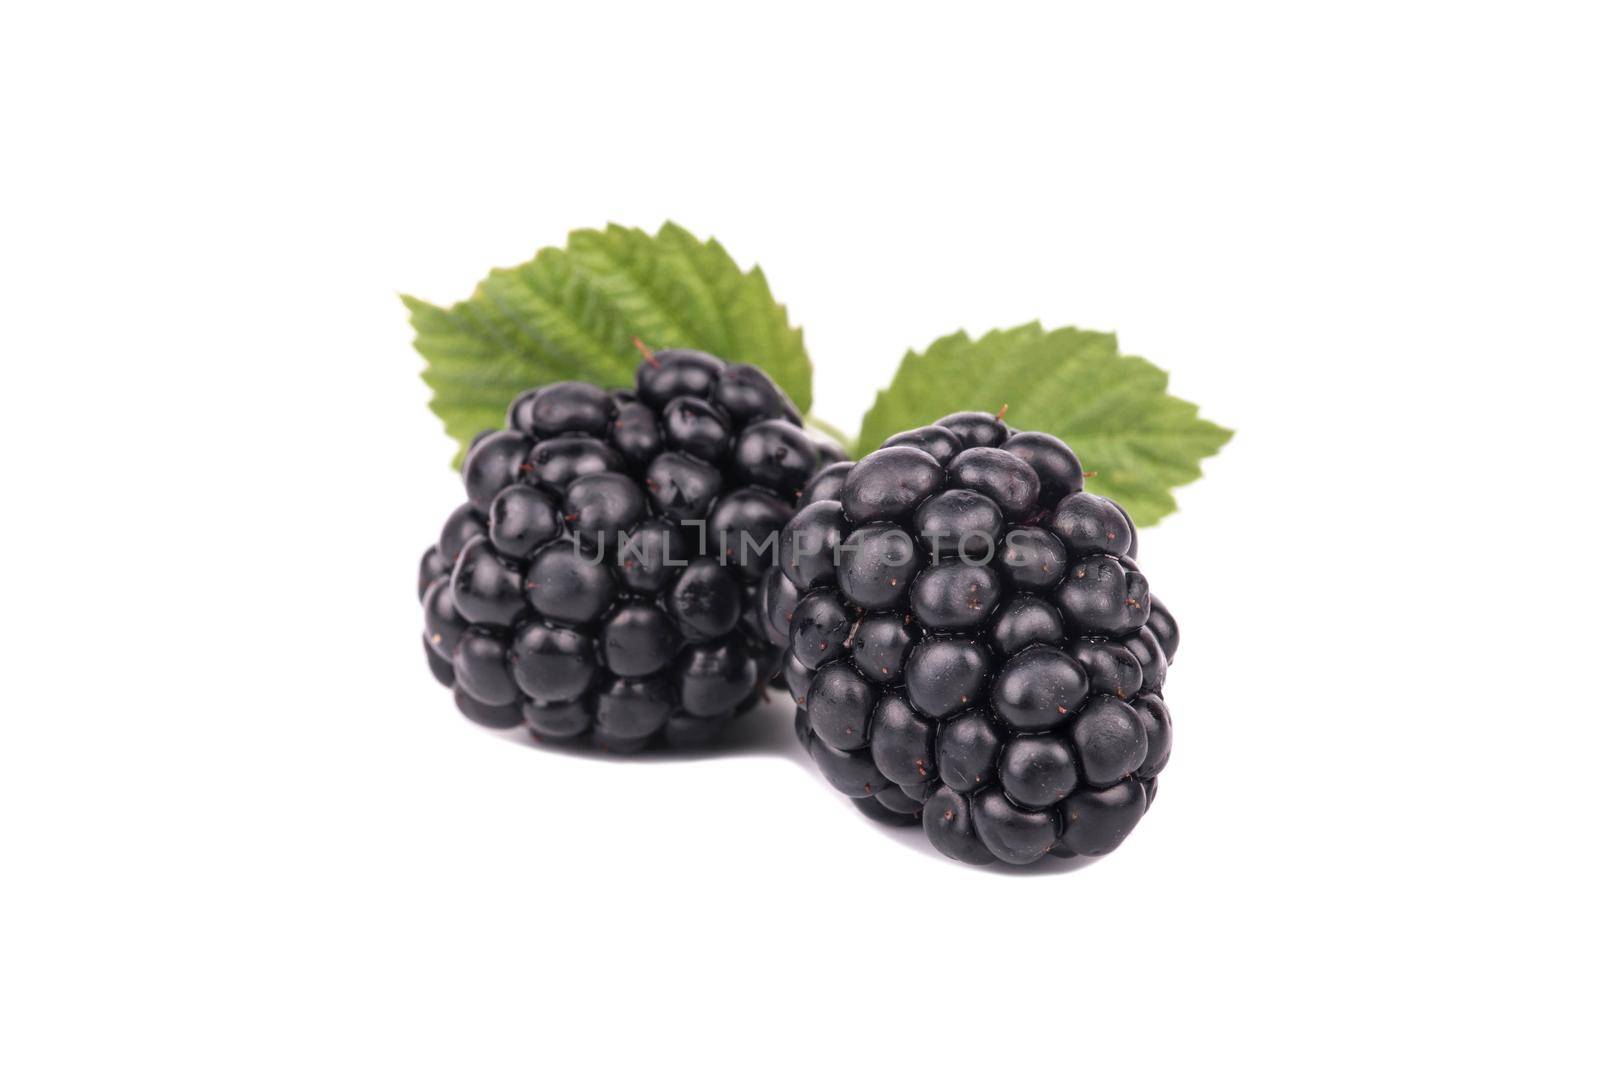 Two fresh blackberries with leaves isolated on white background